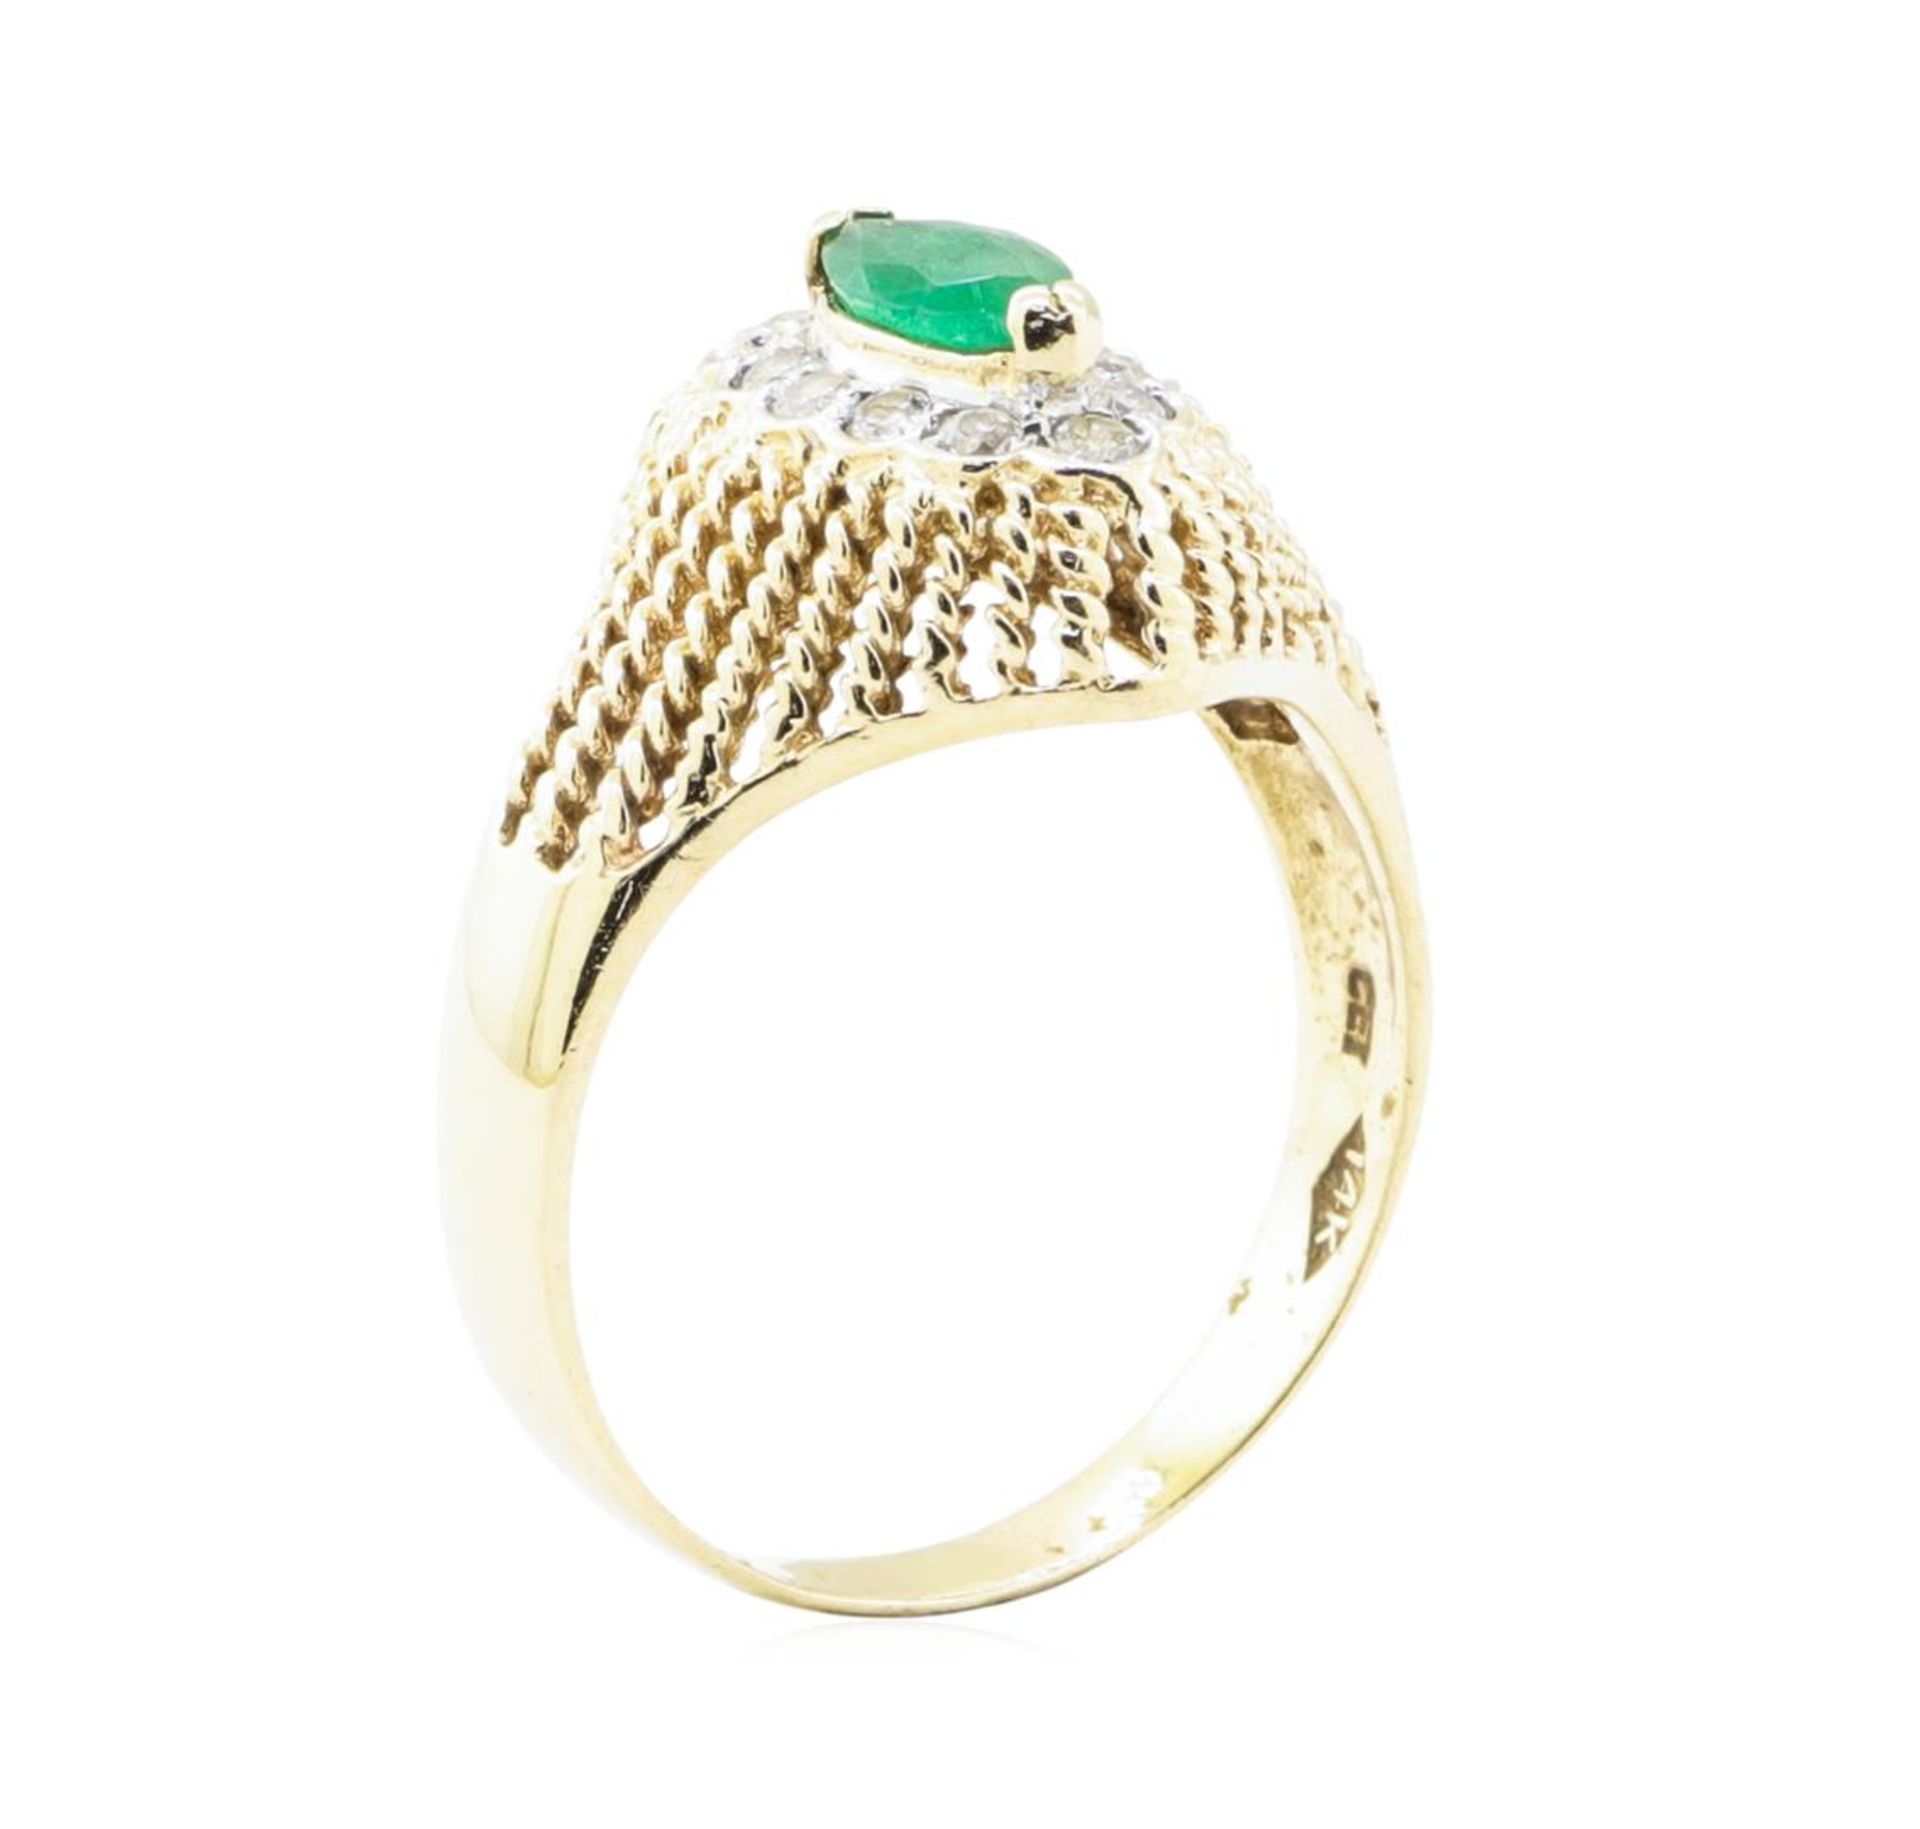 0.65 ctw Emerald And Diamond Ring - 14KT Yellow And White Gold - Image 4 of 5